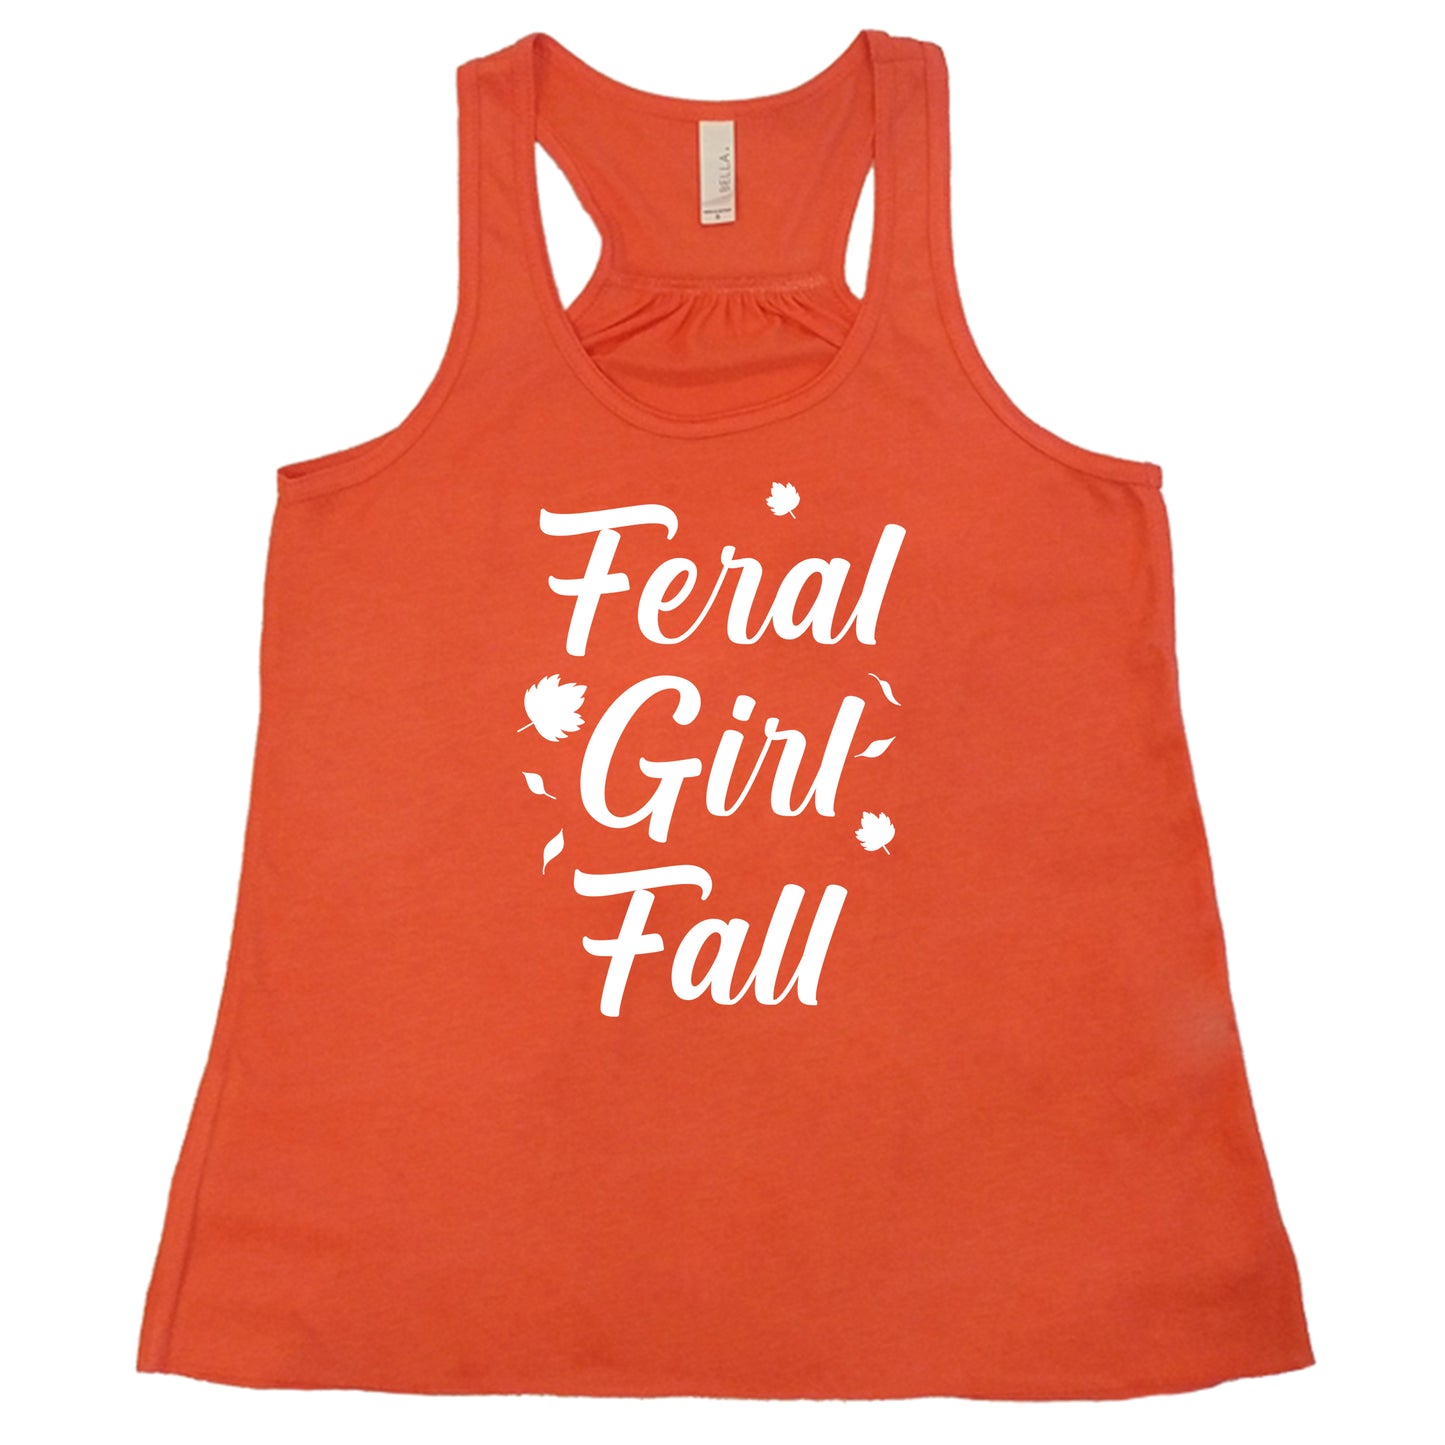 white quote "Feral Girl Fall" on a coral racerback shirt